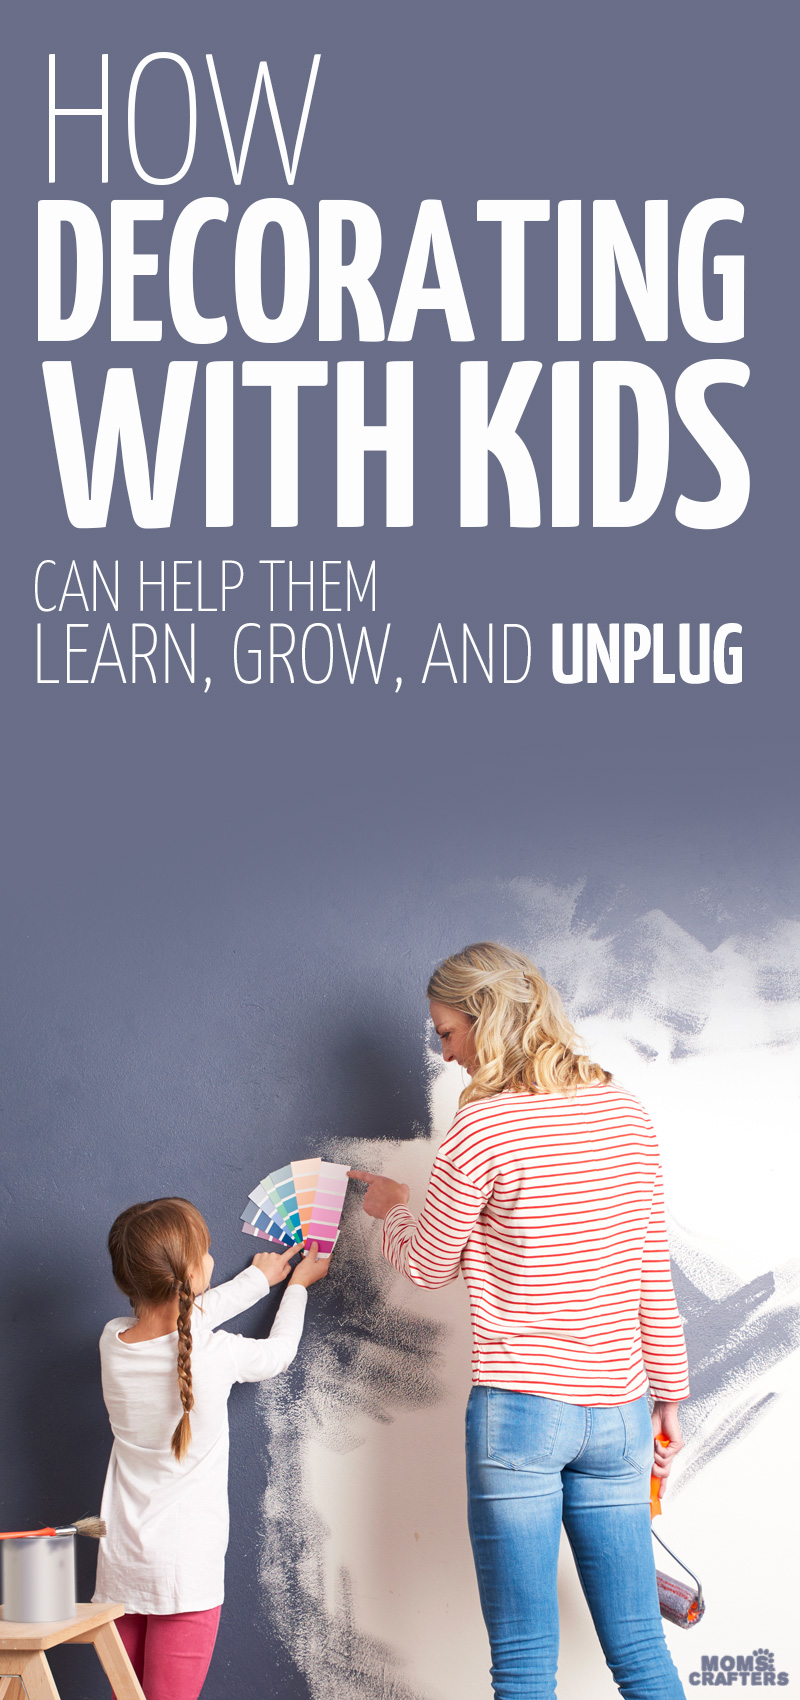 Take on a home decor project with kids - here's why! Decorating with kids can be a hands-on educational experience that can help them unplug and disconnect from their devices for a change. 